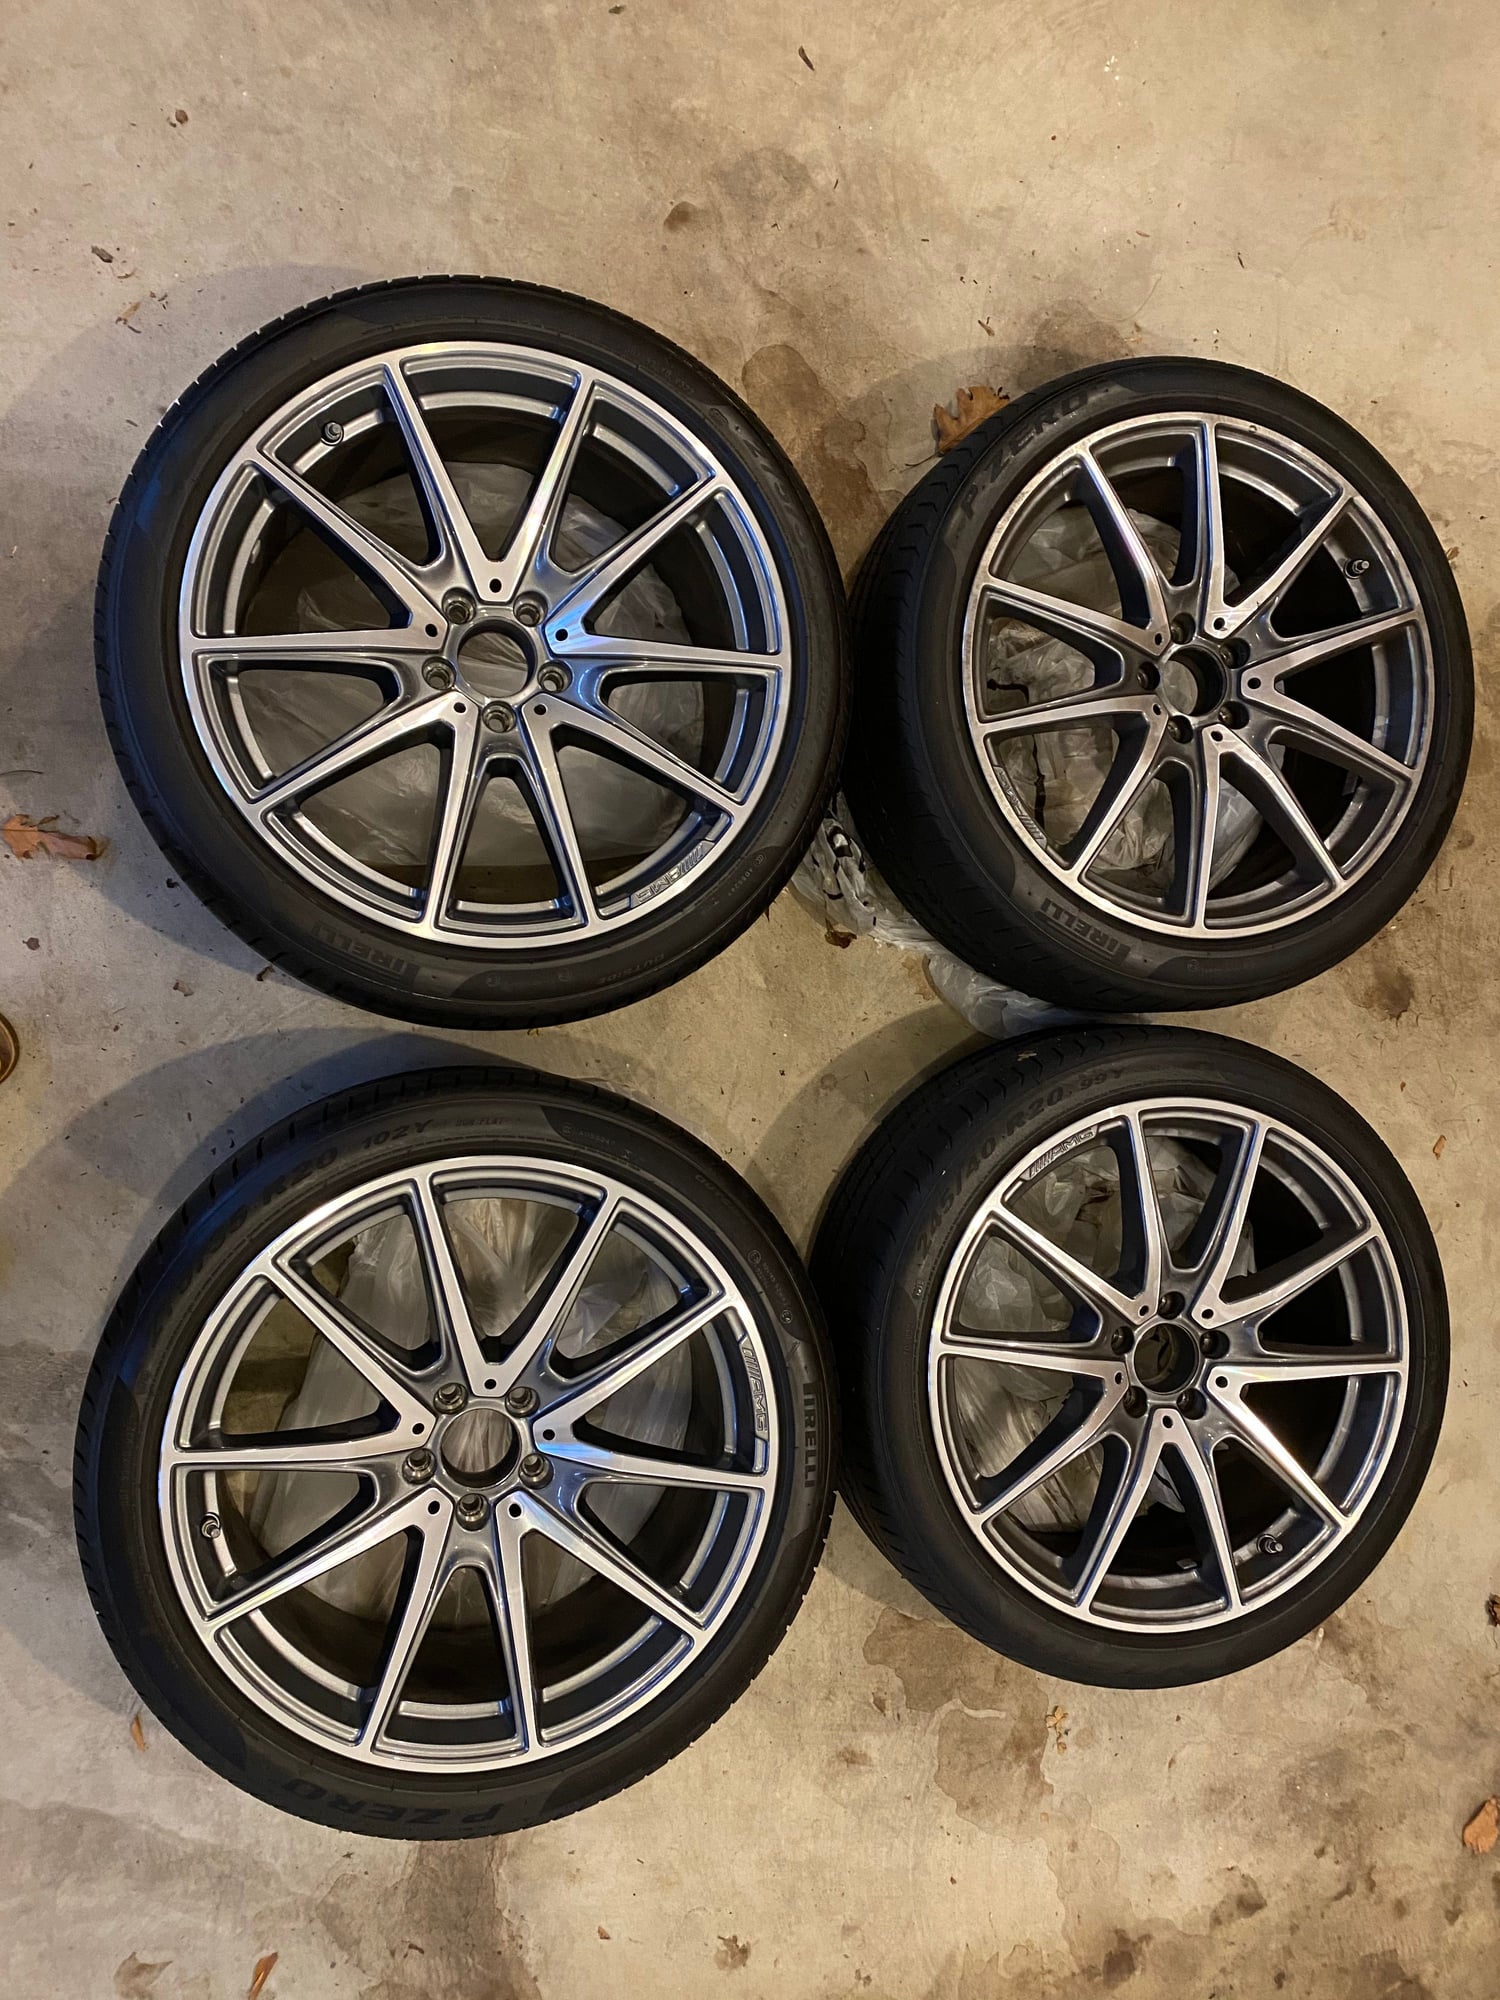 Wheels and Tires/Axles - FS: 2018+ AMG OEM wheels (direct from Germany) from S550 4matic - $3850 - Used - 2014 to 2020 Mercedes-Benz S550 - 2018 to 2020 Mercedes-Benz S450 - 2018 to 2020 Mercedes-Benz S560 - 2014 to 2020 Mercedes-Benz S63 AMG - Westport, CT 06880, United States